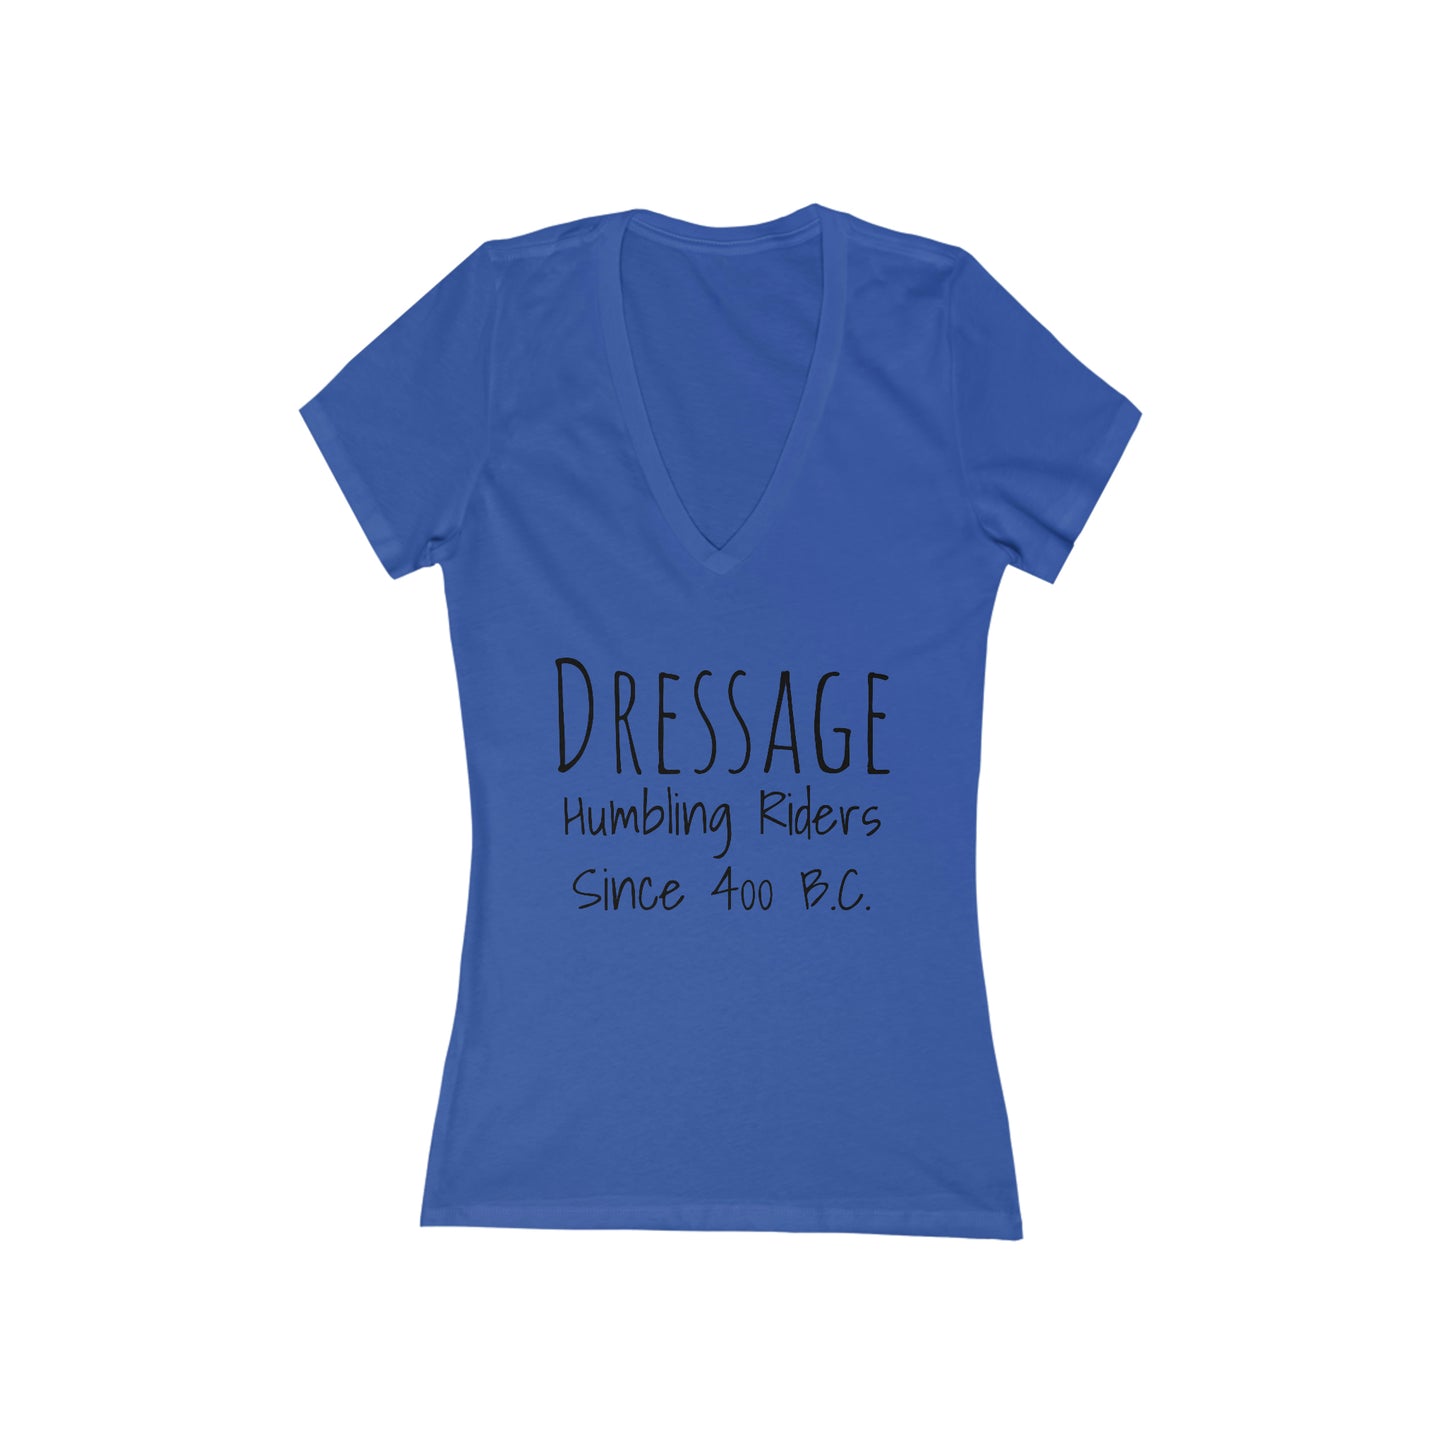 Shirt - Dressage, Humbling Riders Since 400B.C.  (V-Neck Tee Fitted)